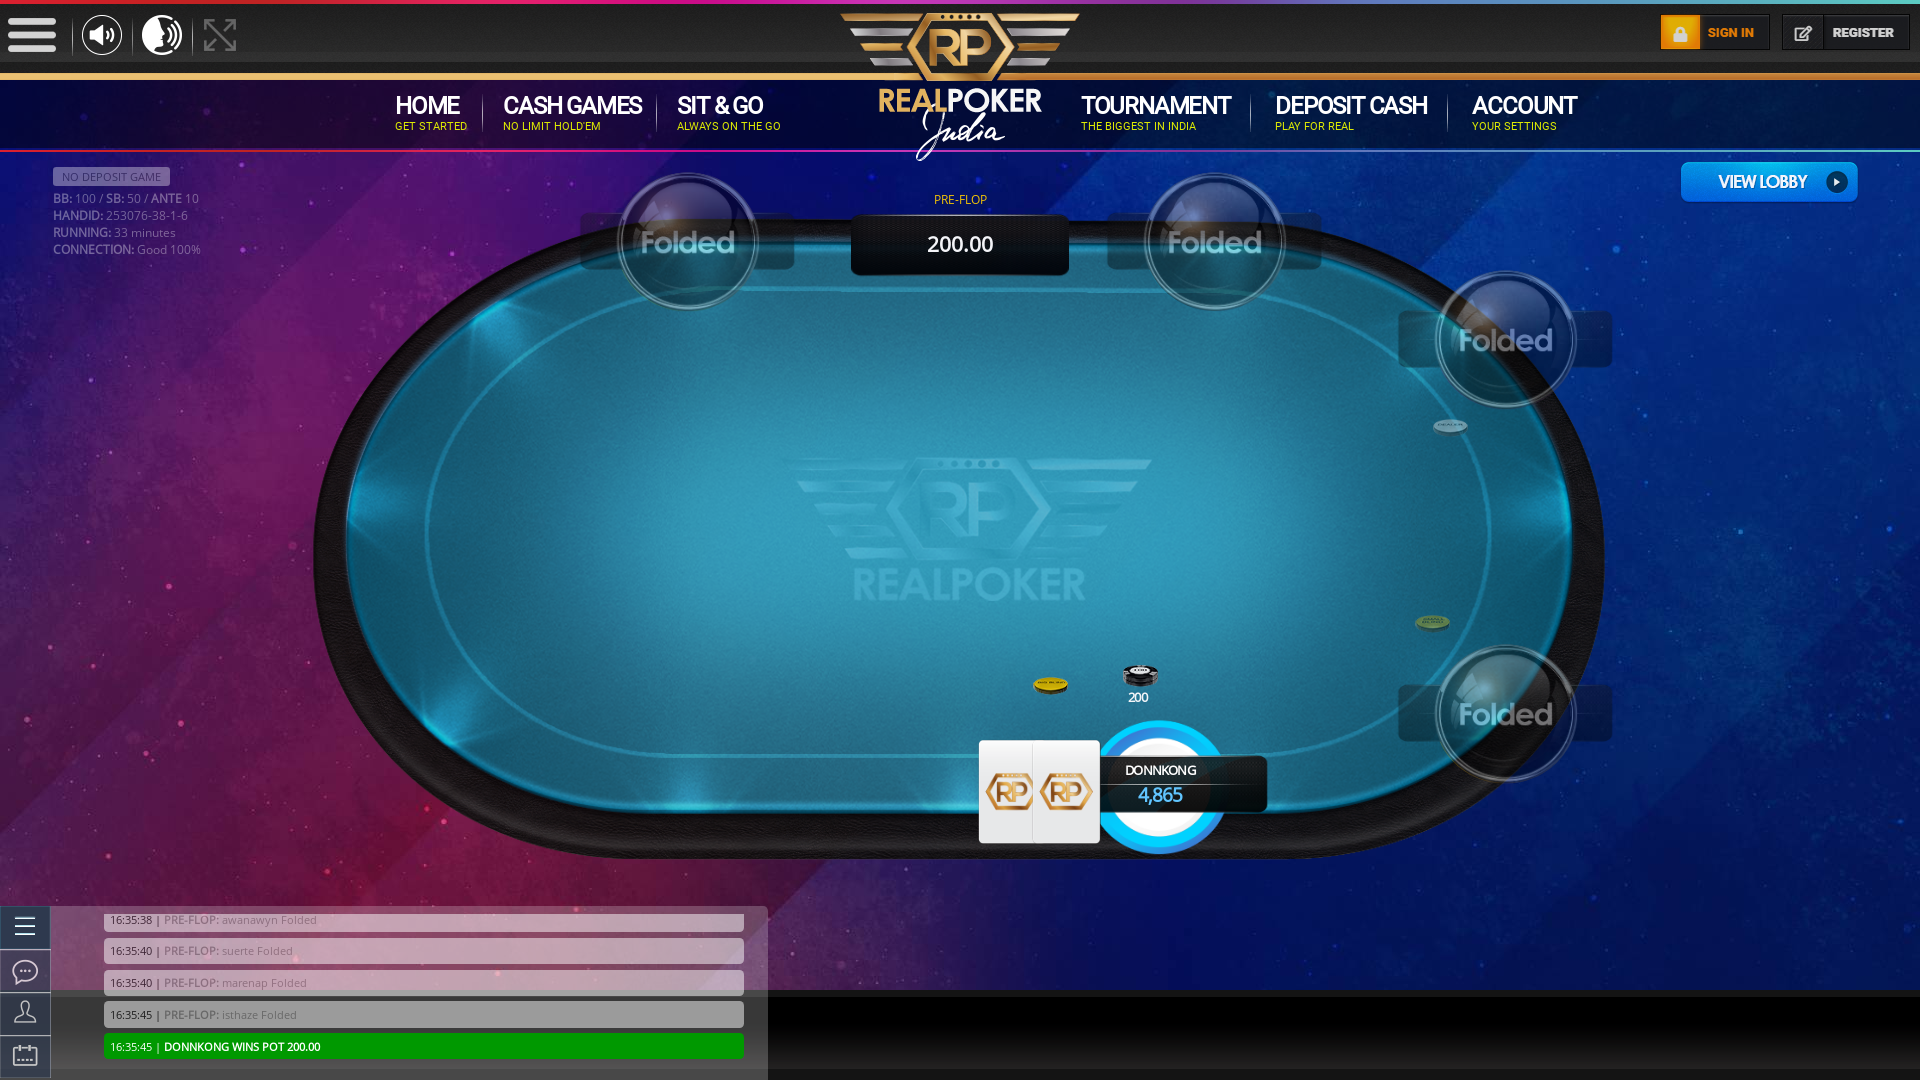 10 player texas holdem table at real poker with the table id 253076